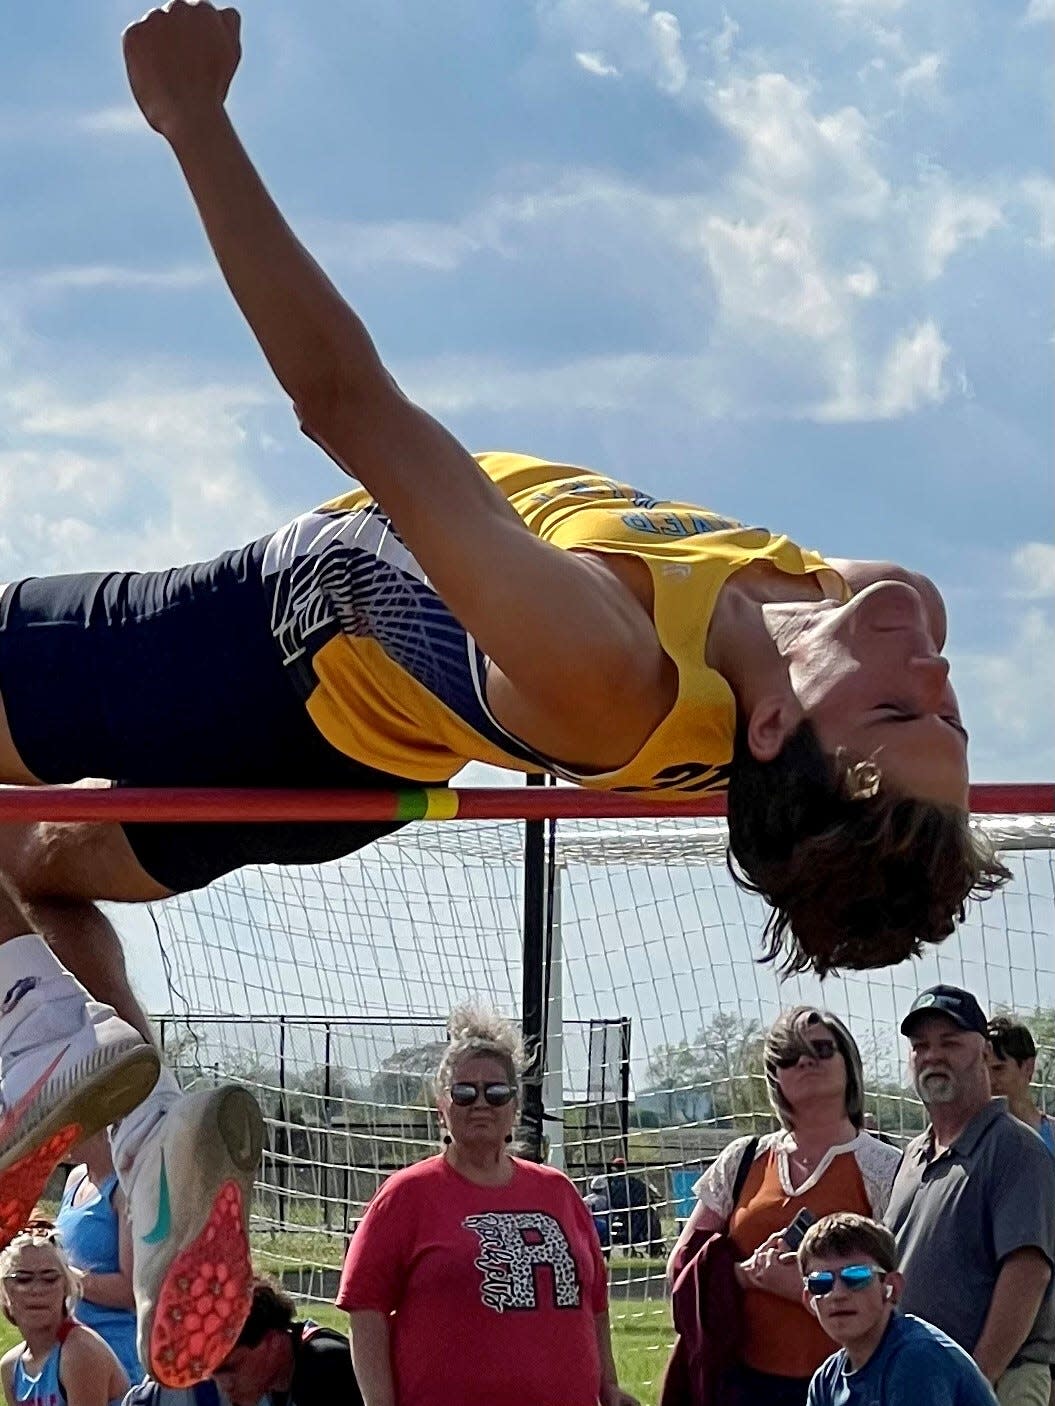 River Valley's Gabe Douce clears the bar en route to winning the boys high jump during Wednesday's Marion County Track and Field Meet at RV.